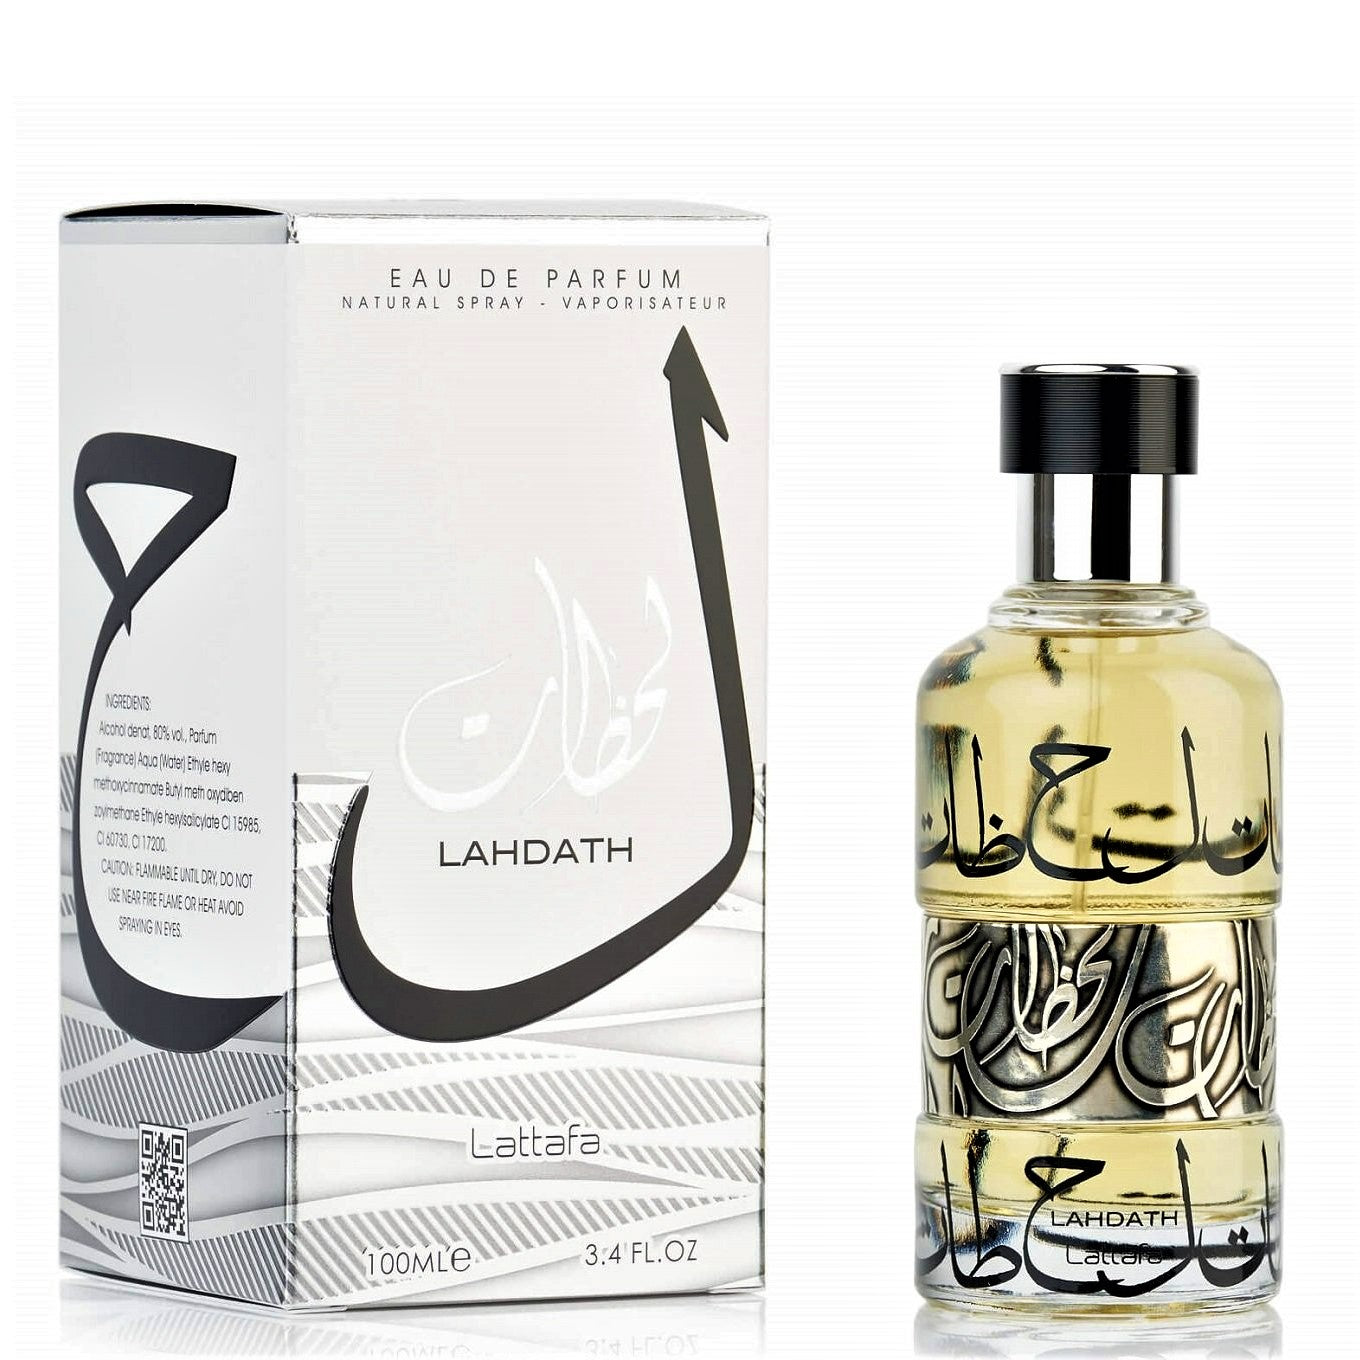 100 ml Eau de Perfume Lahdath Woody and Spicy Fragrance For Men (Top: Iris, Lemon, Sage / Middle: Ylang-yland, Mint and Violet Leaves) | -80% Akce na Šperky